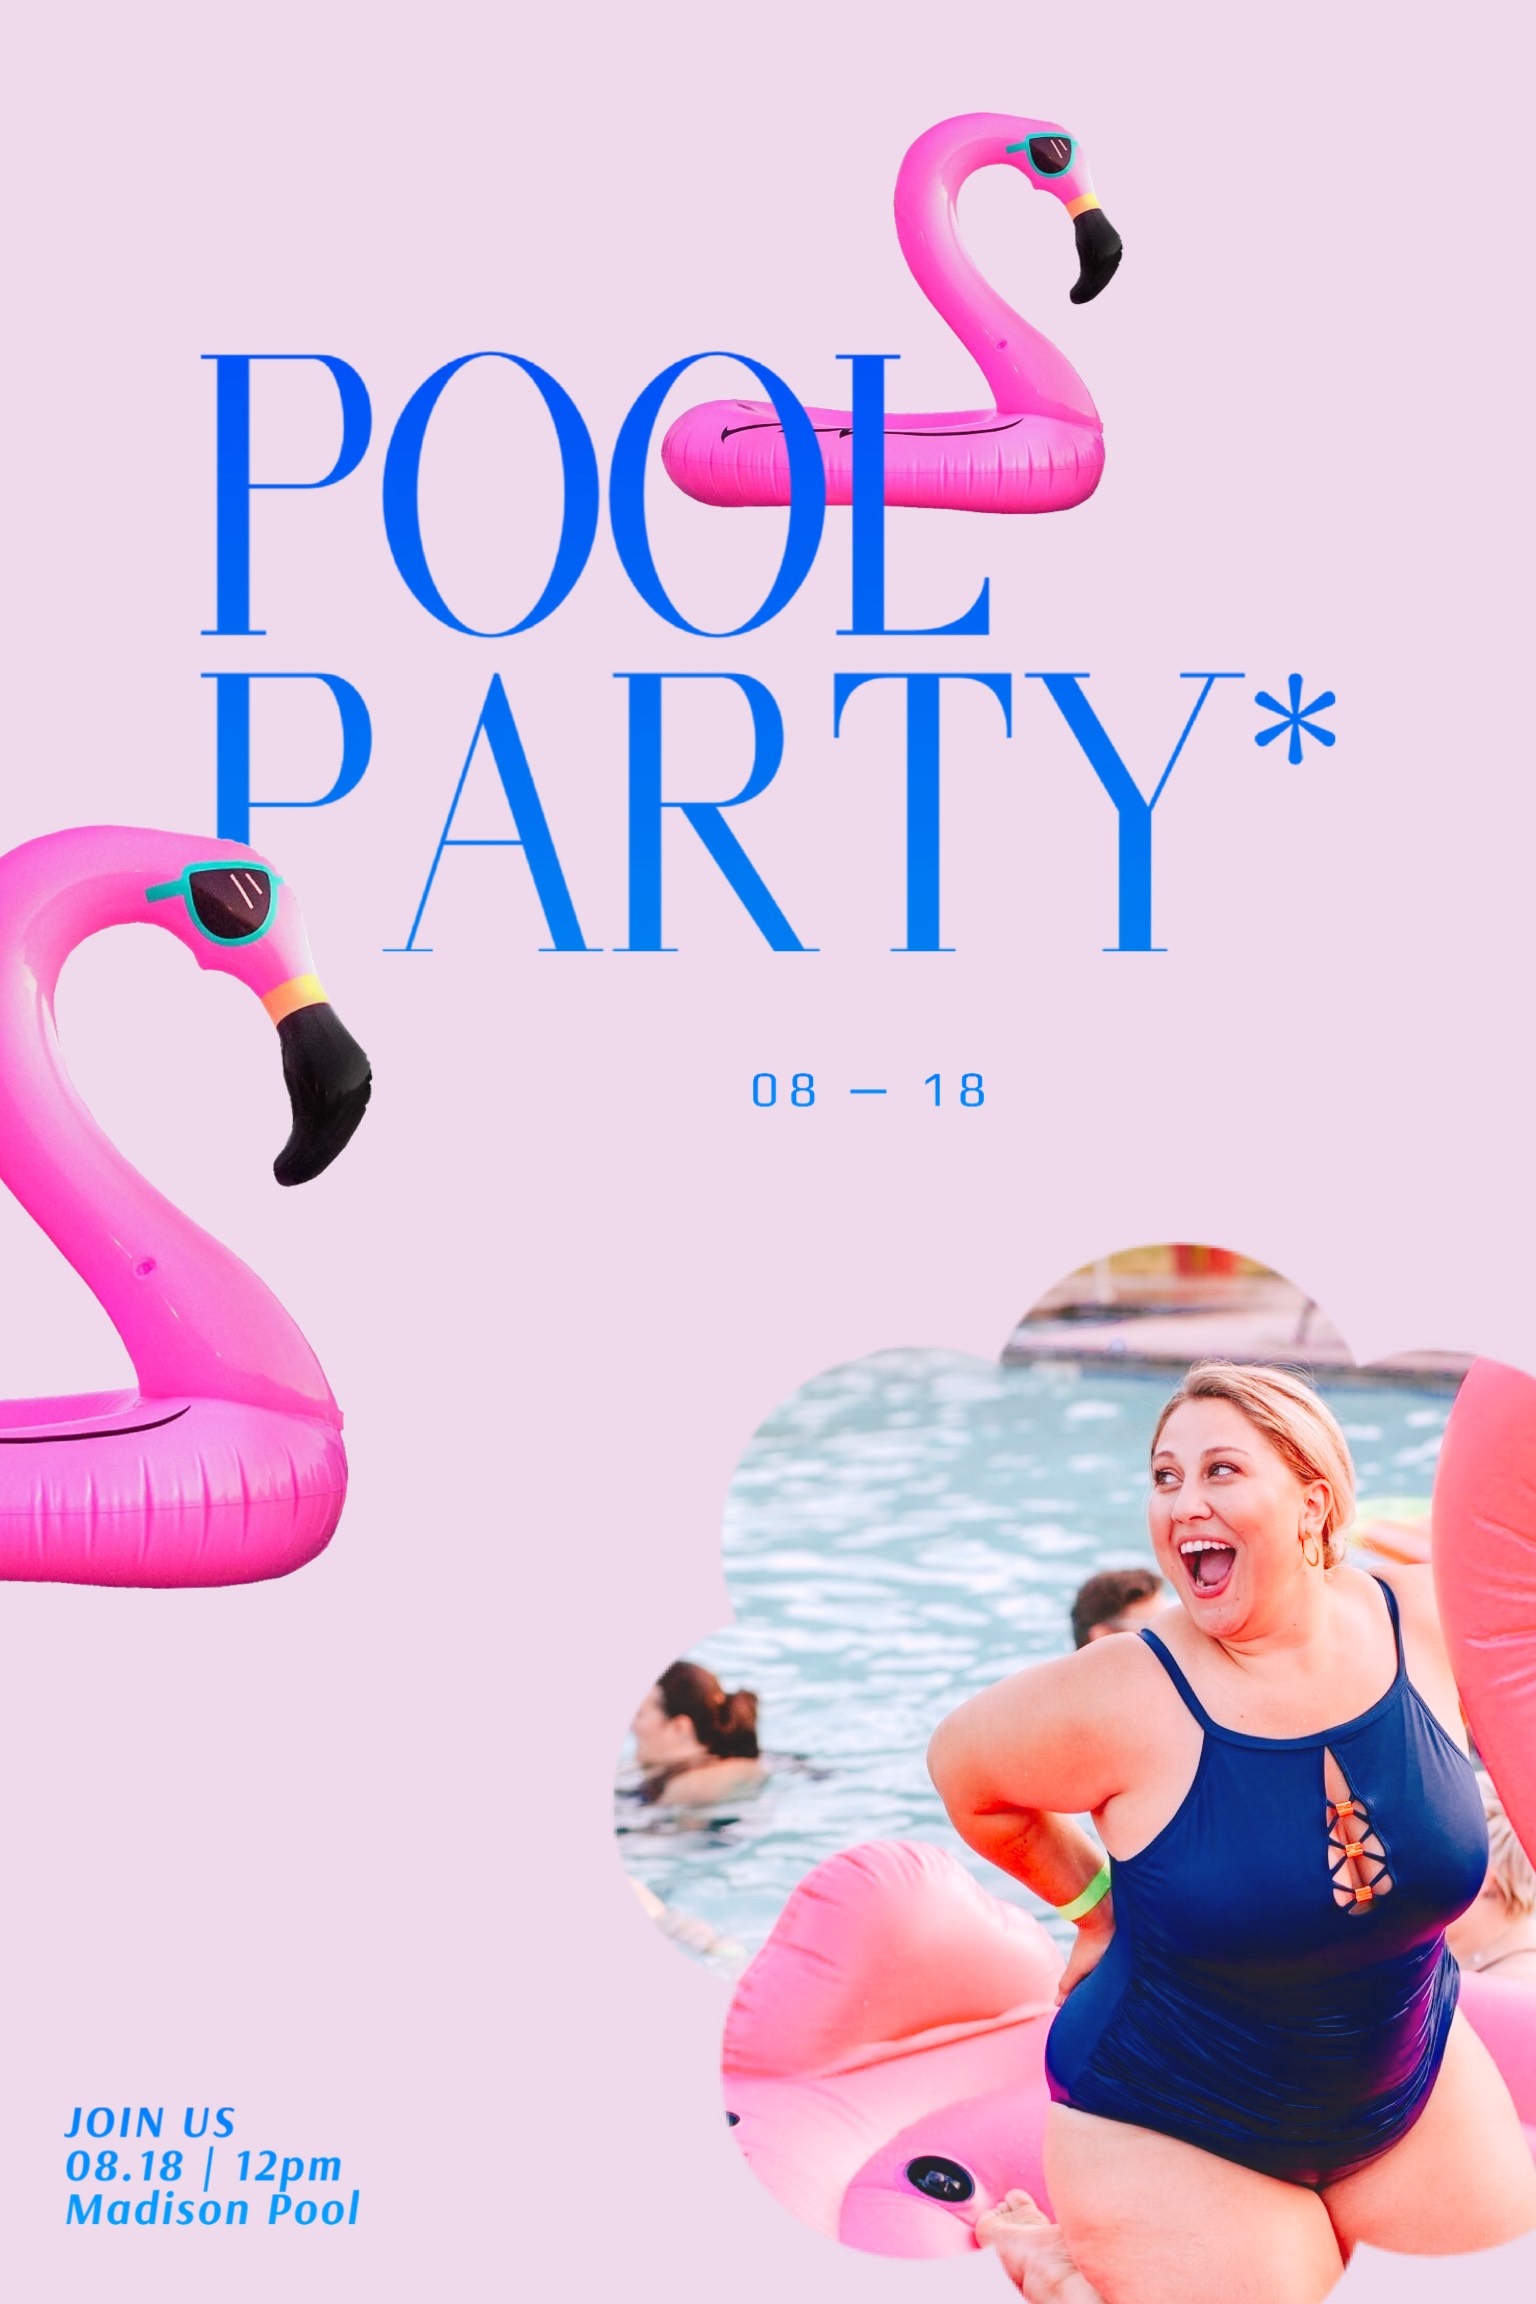 A Woman In A Blue Swimsuit Standing Next To A Pink Flamingo Pool Party Invitation Template